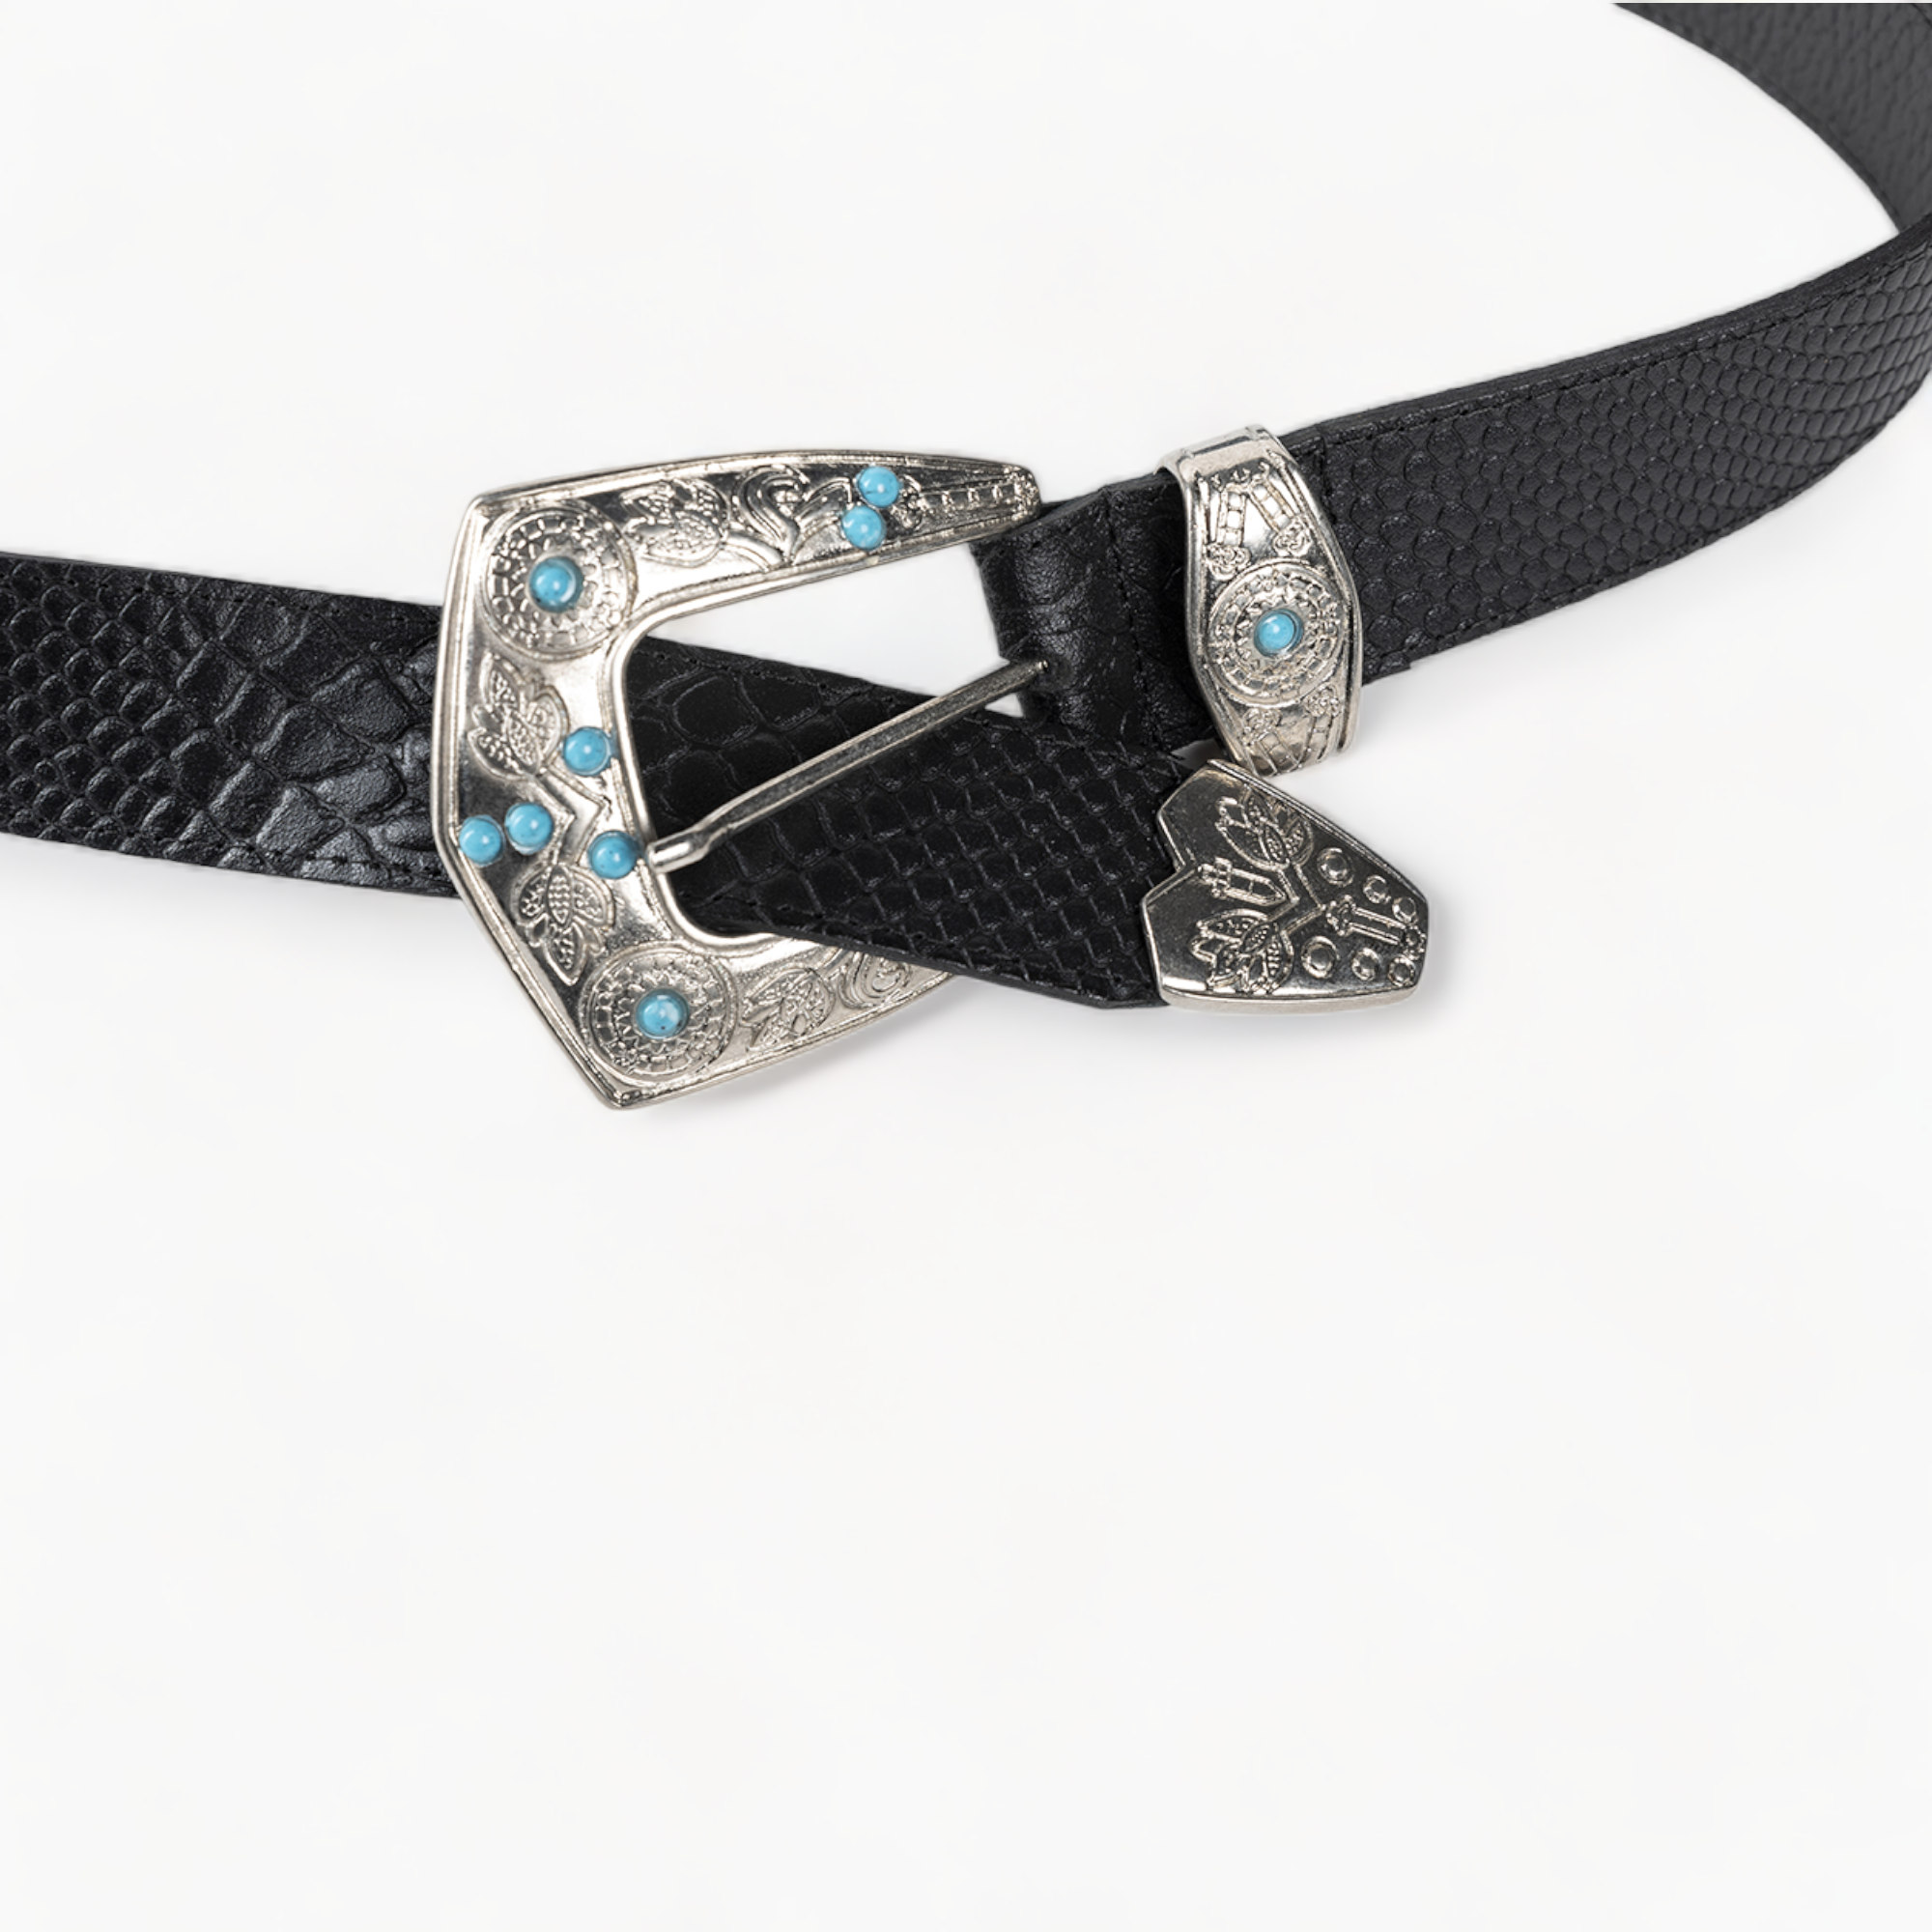 Black leather belt with a silver buckle